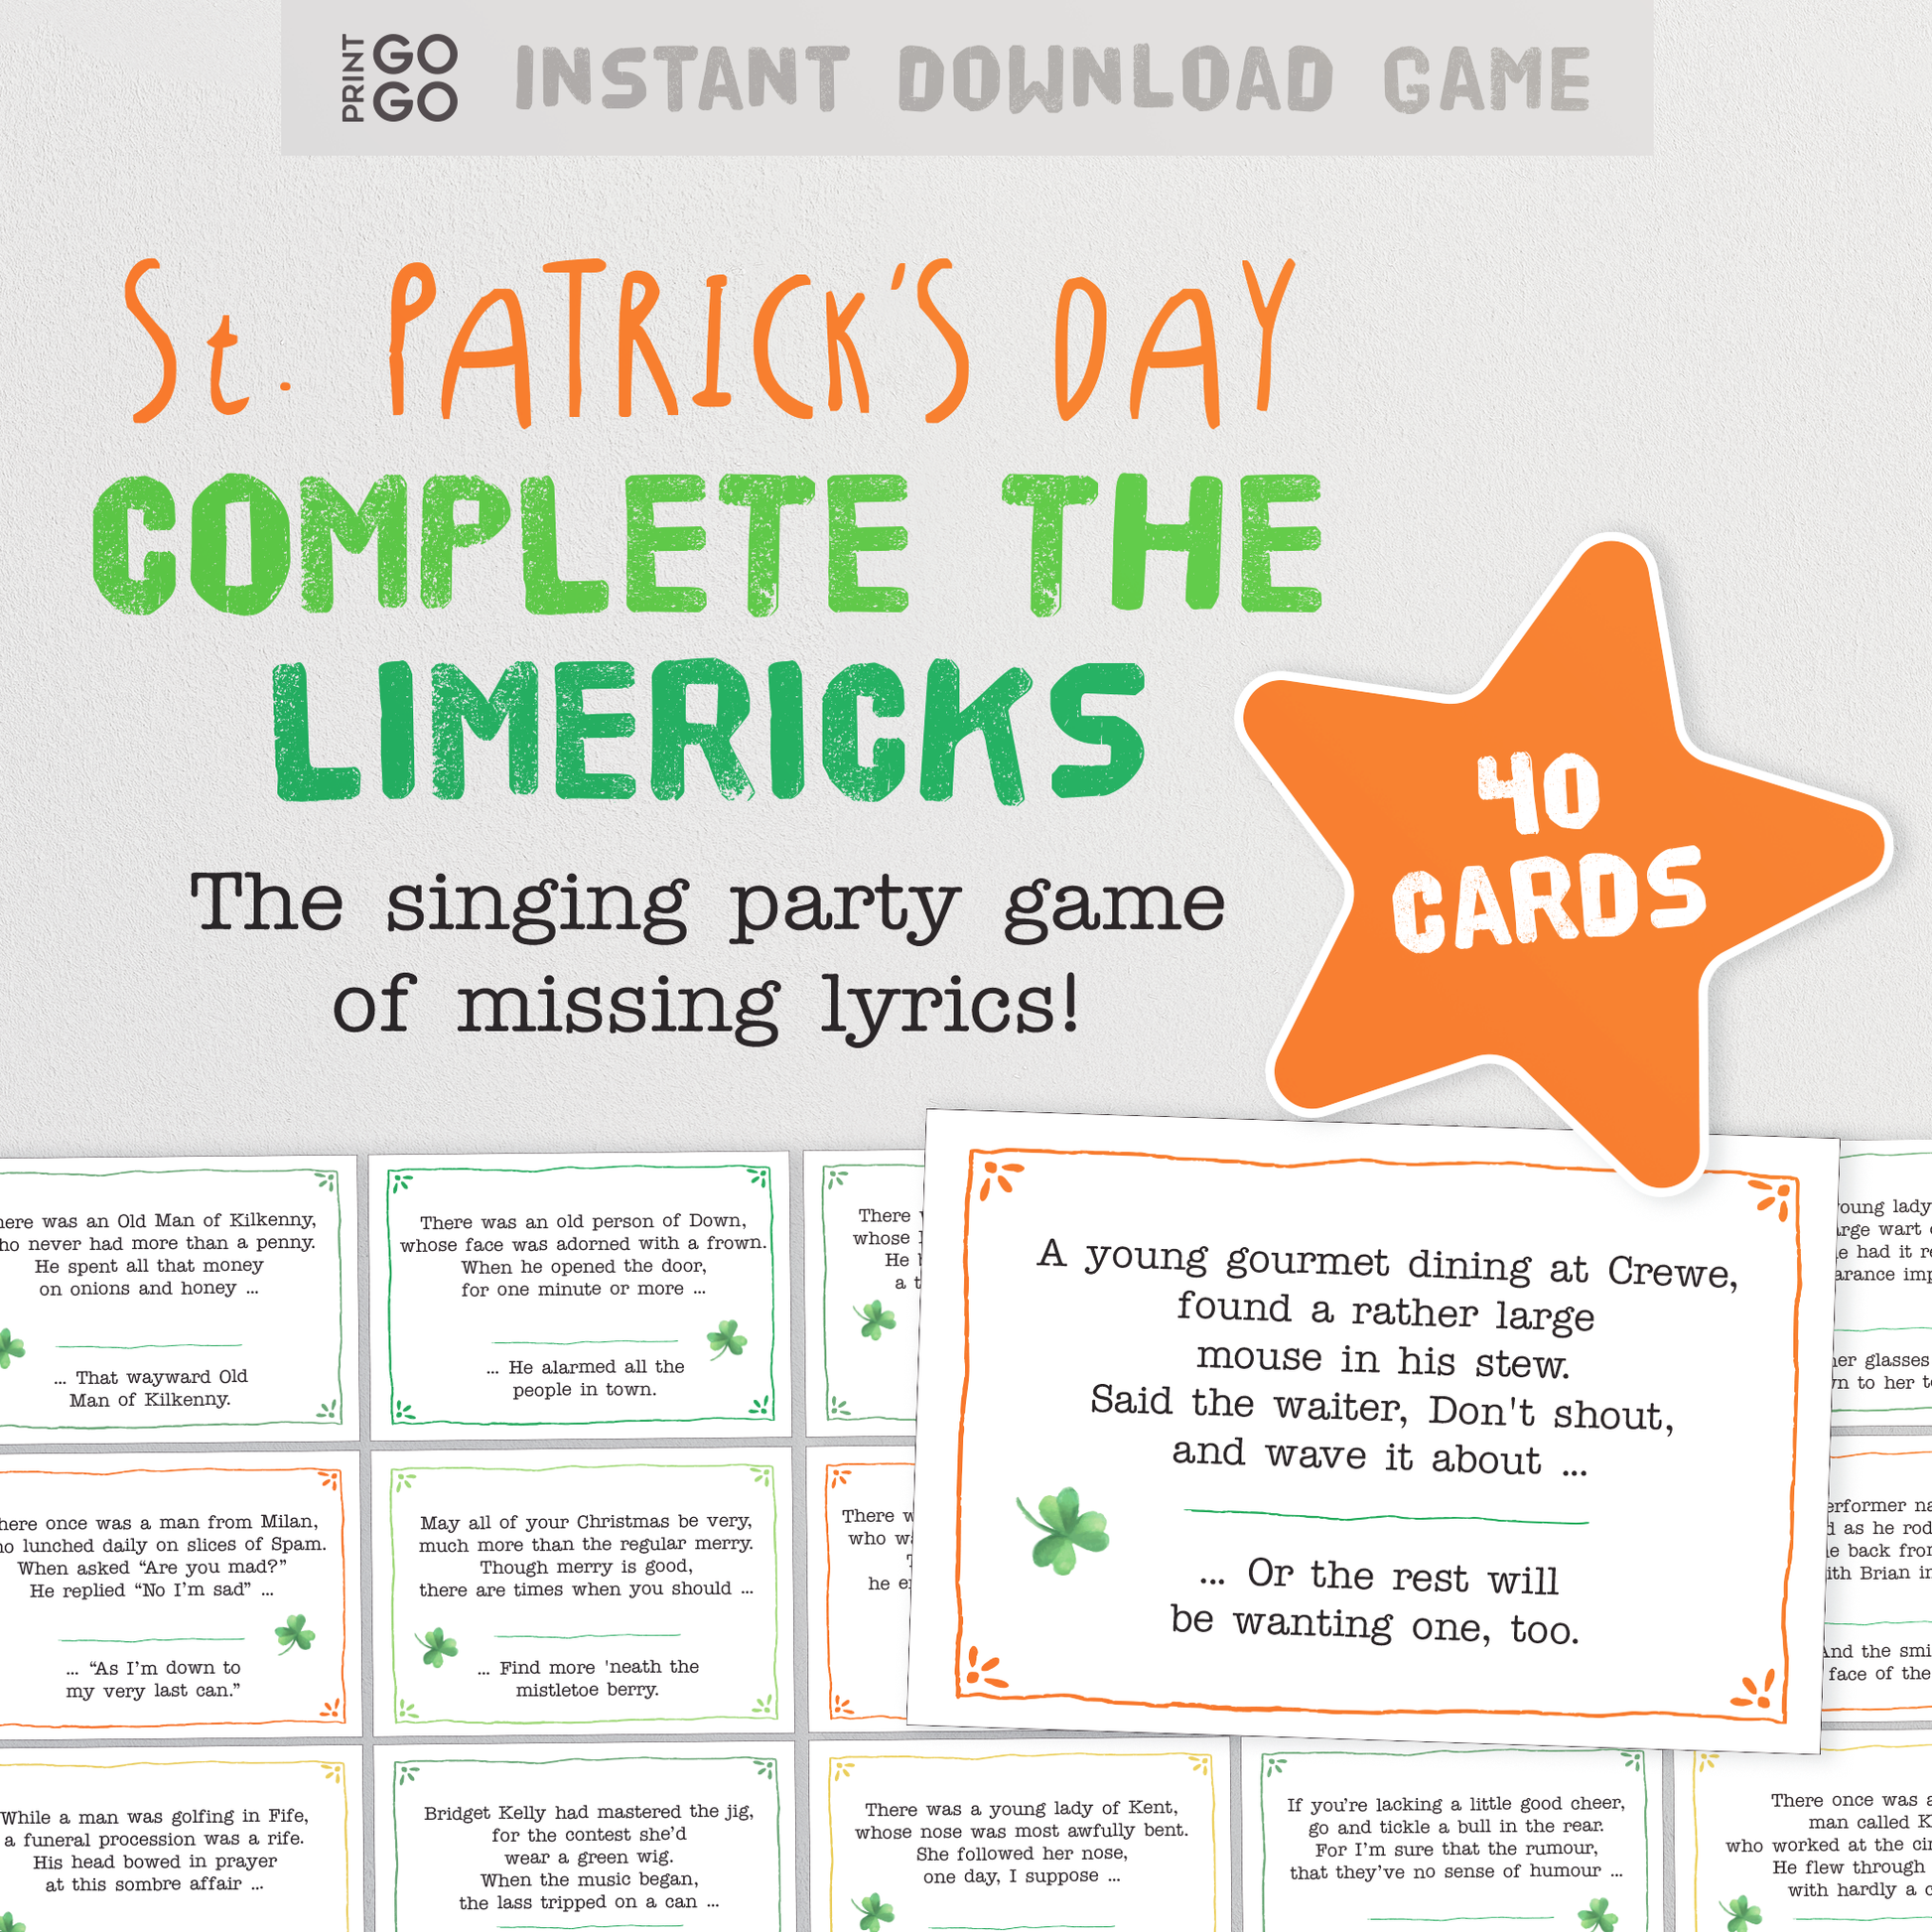 St. Patricks Day Complete The Limericks - The Quick Thinking Party Game